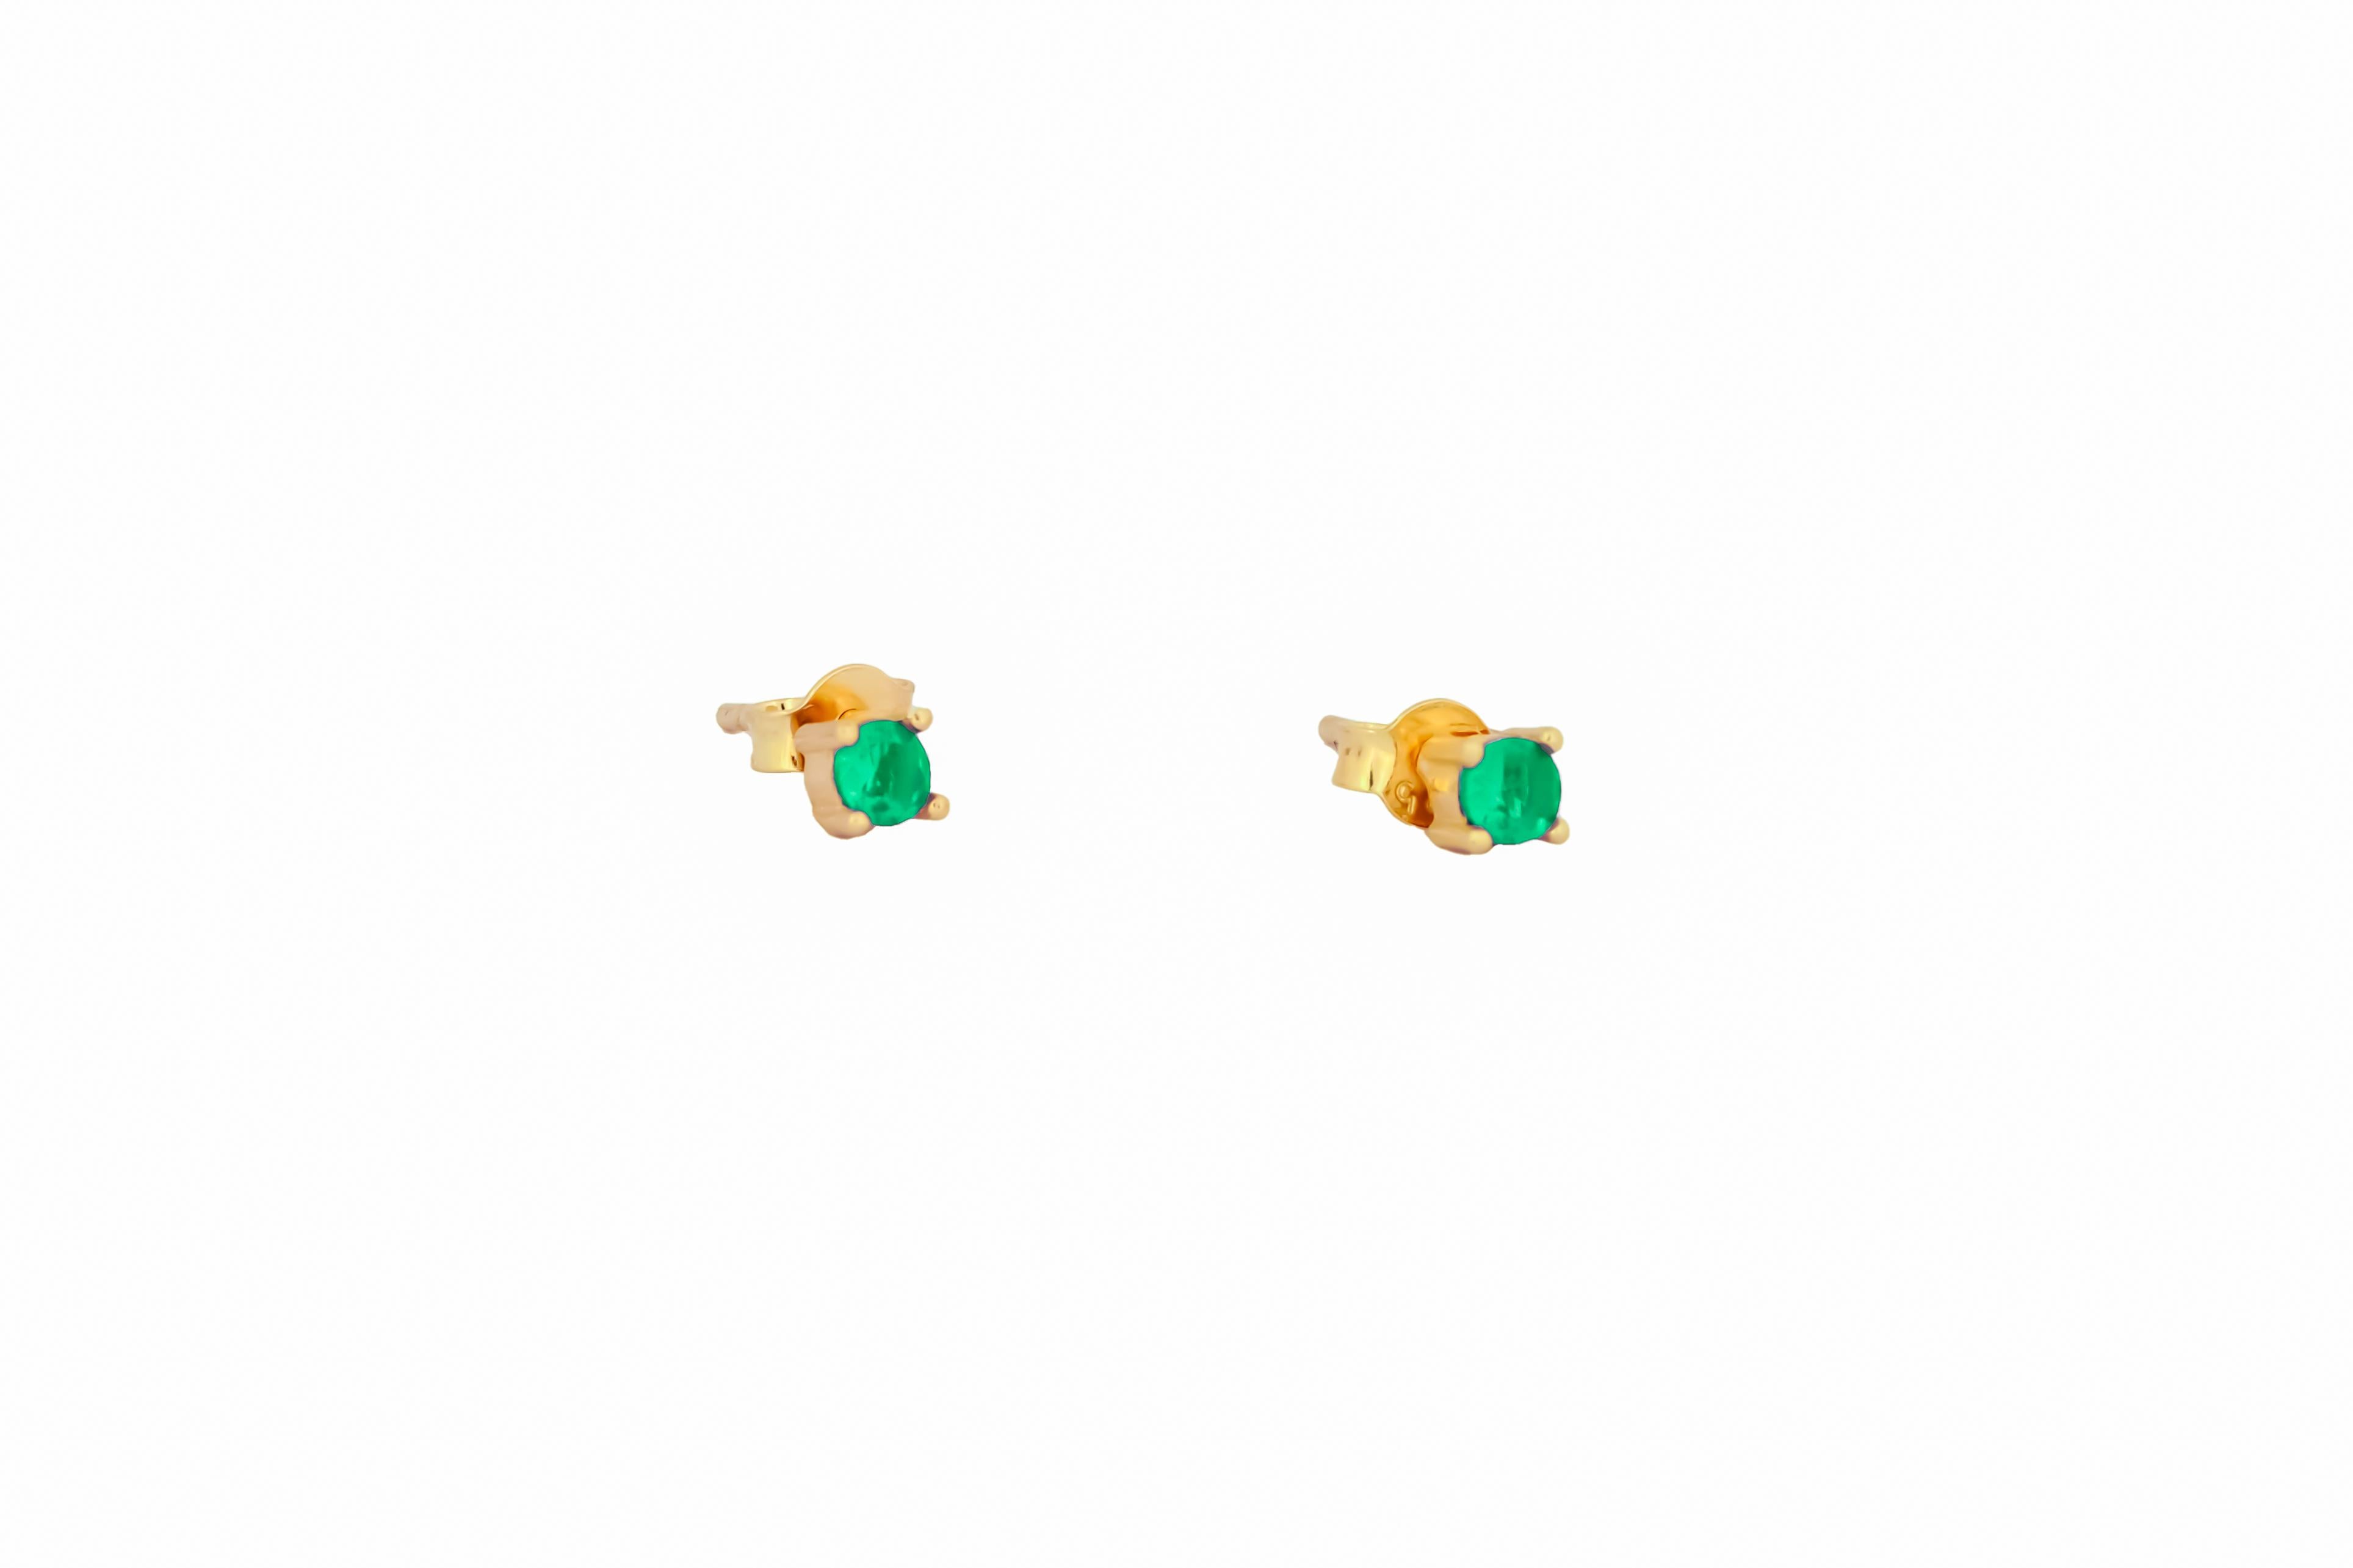 14 ct Gold Lab Emerald Stud Earrings.  
3 mm emerald earrings. Green gemstone earrings. Small delicate gold earrings studs. Four prong studs. Minimalist emerald earrings.

Metal: 14k solid gold
Weight: 1.5 gr.
Earrings goes with gold